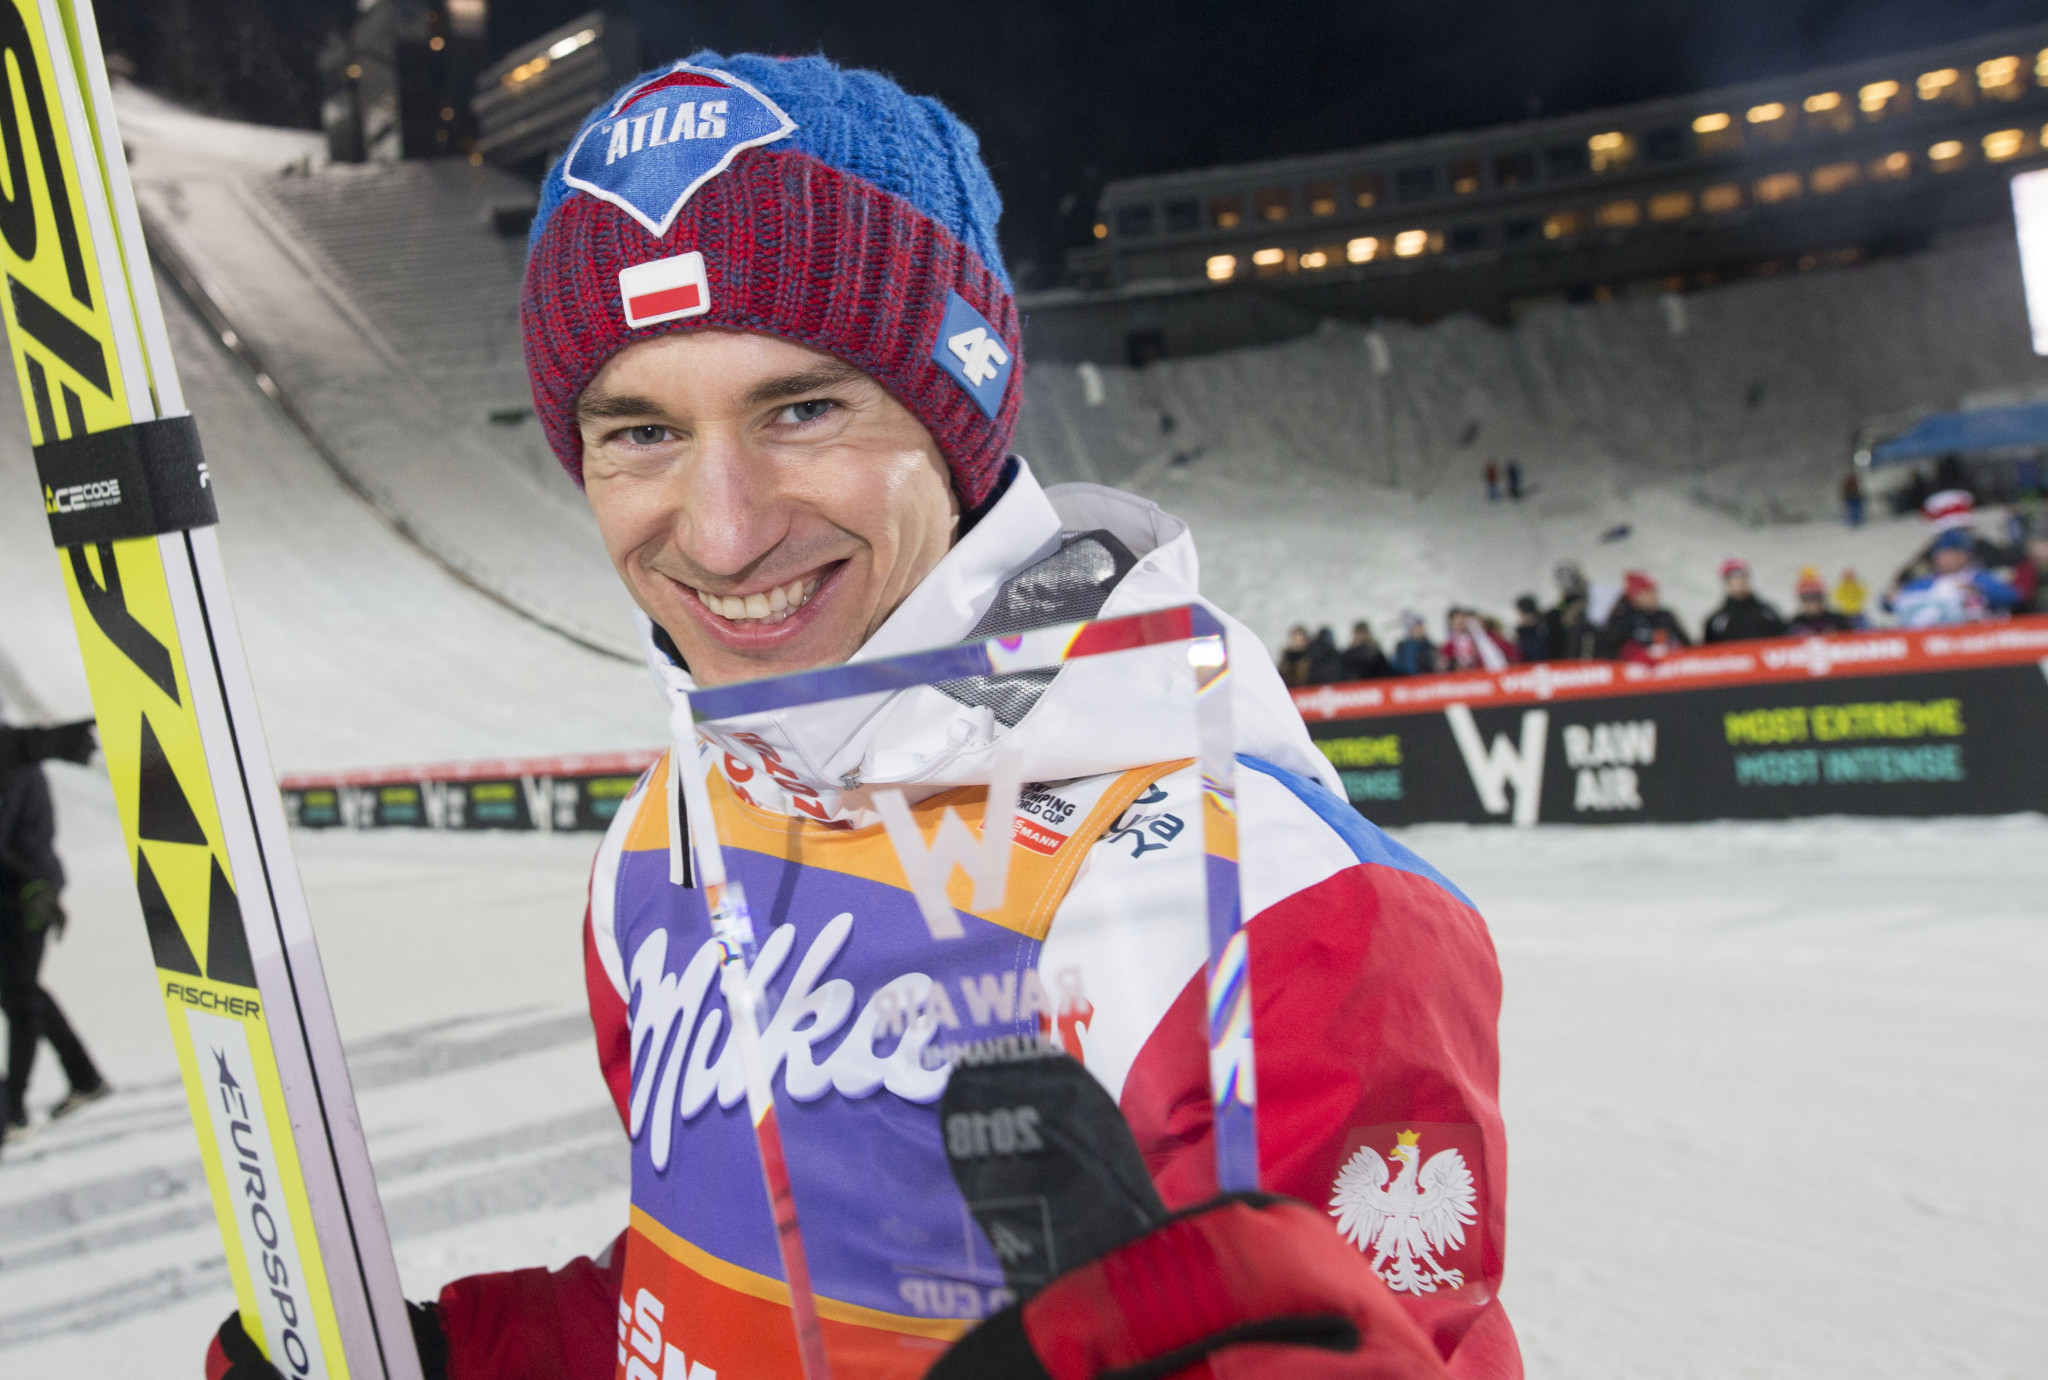 Stoch continues fine Ski Jumping World Cup form with Raw Air win in Trondheim